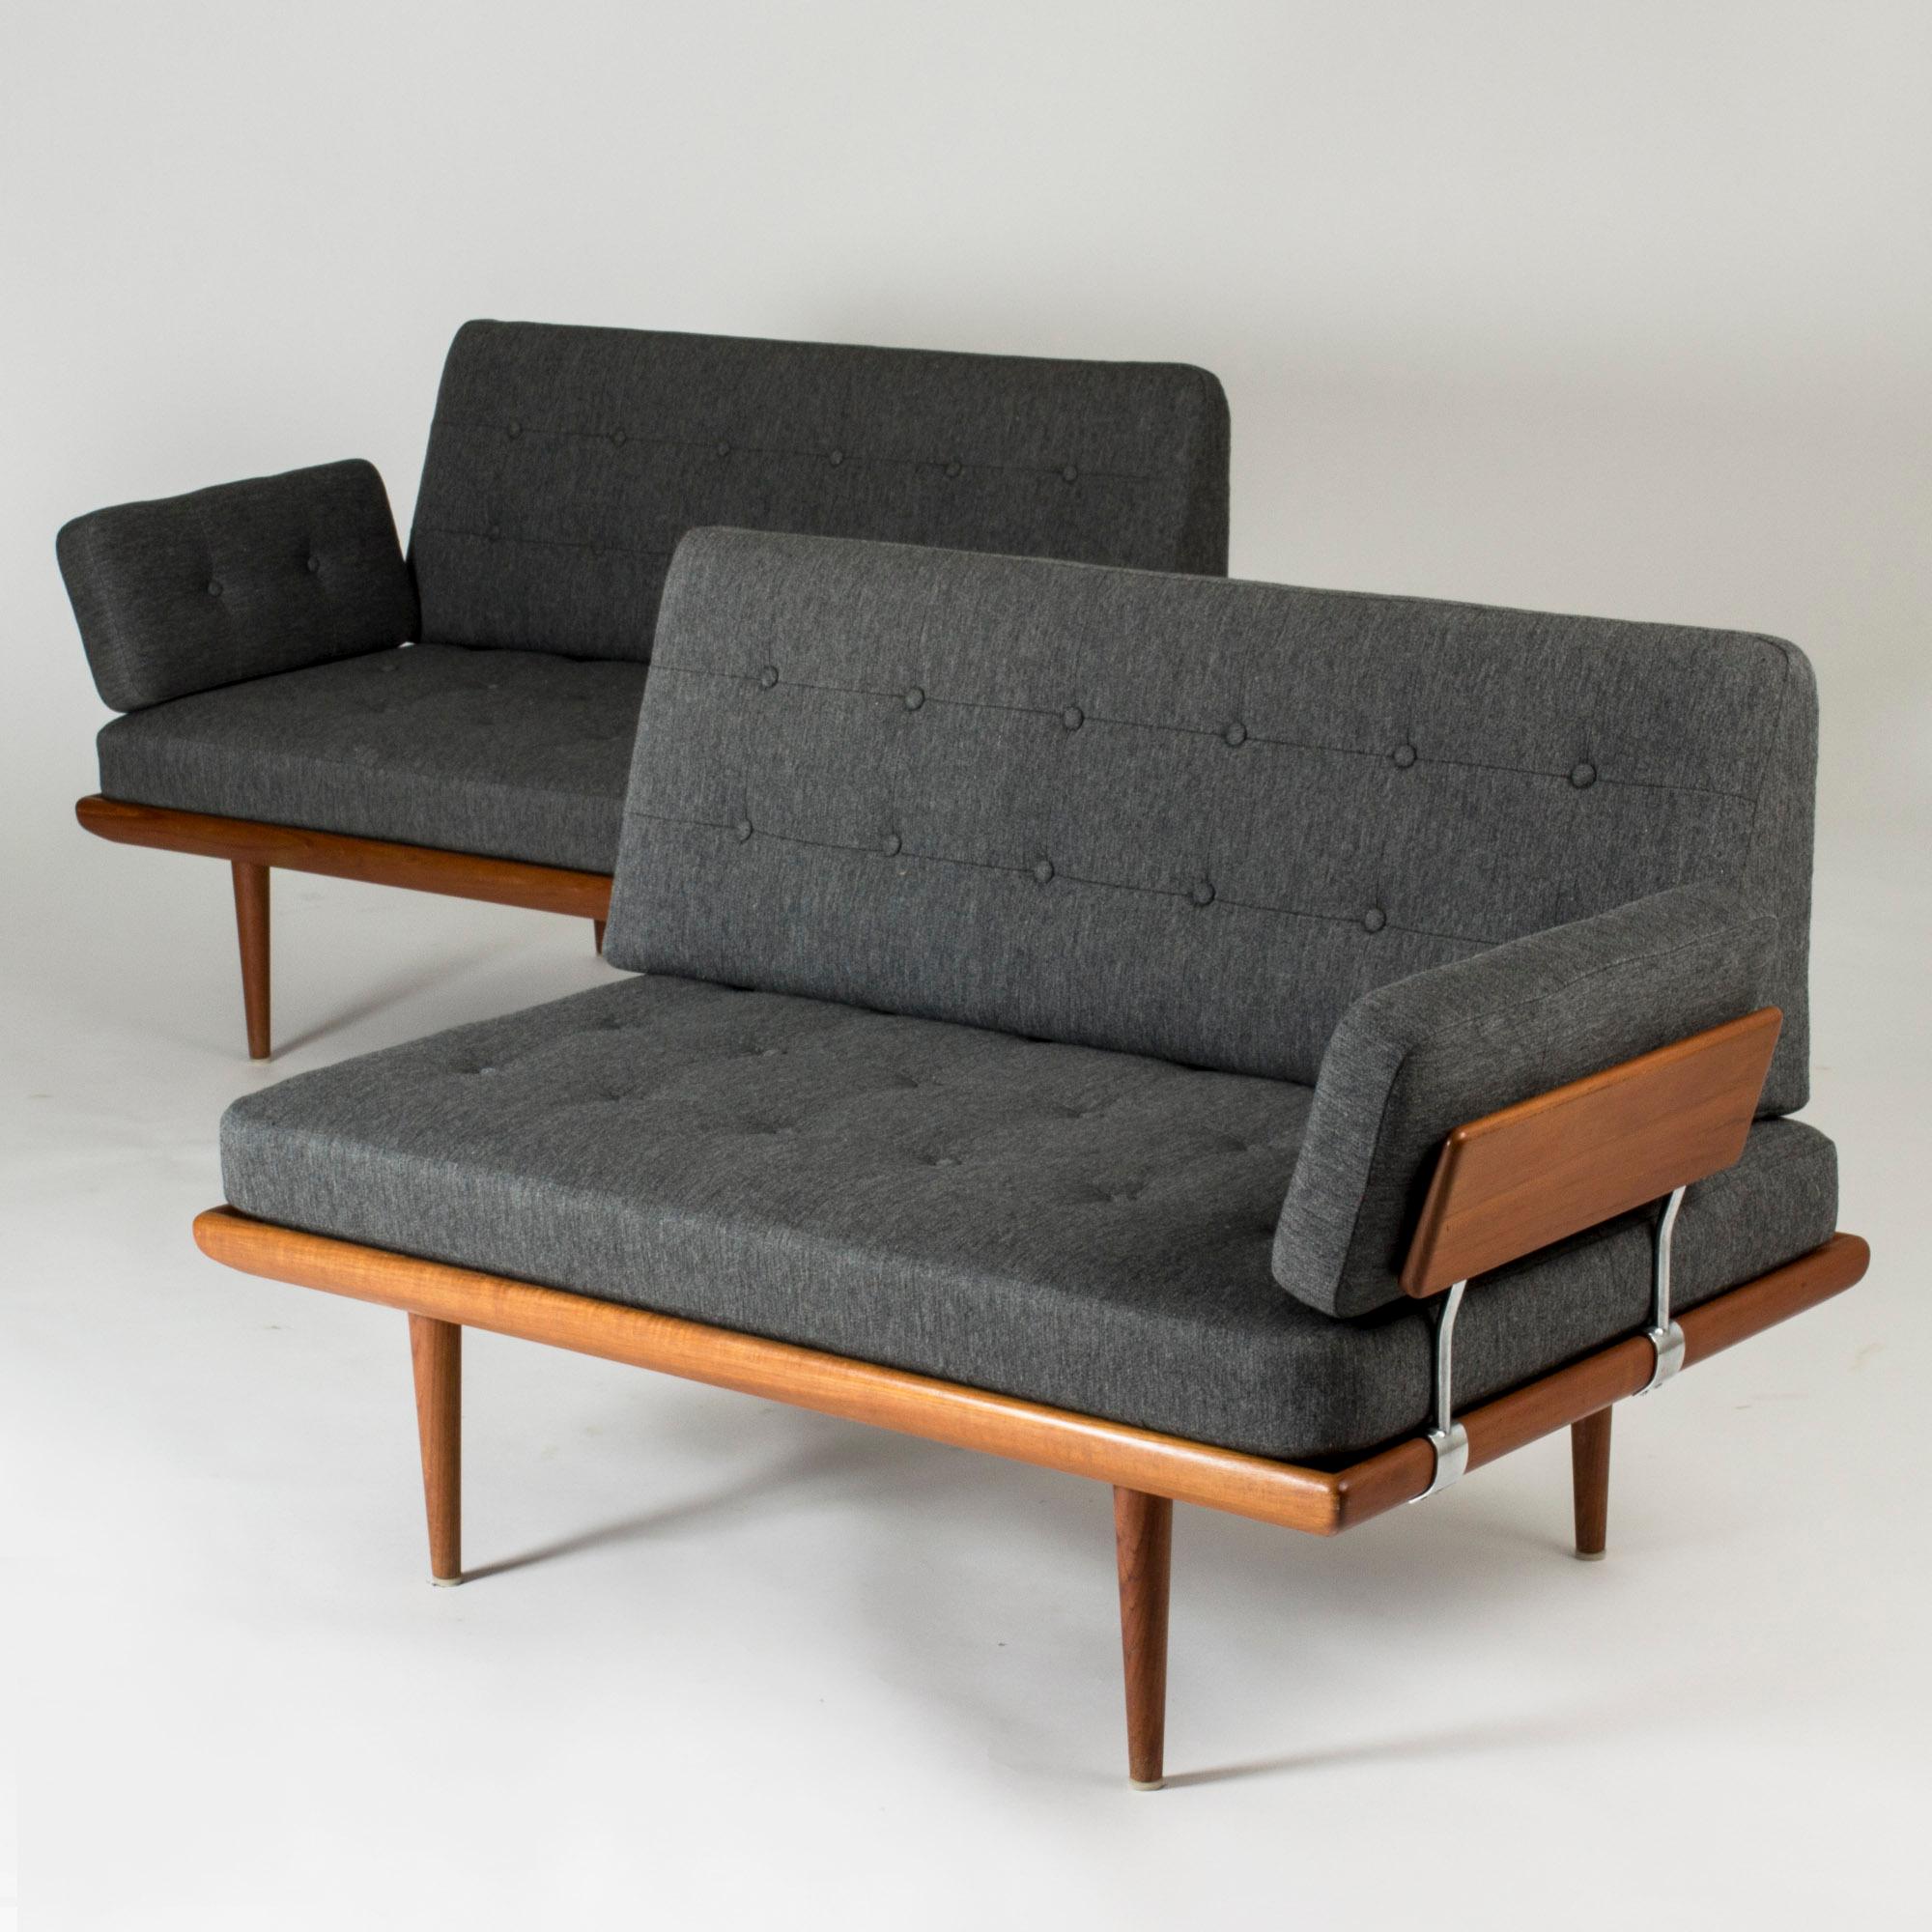 “Minerva” sofa by Peter Hvidt and Orla Møllgaard, made up from two sections. Can be easily switched into a daybed by removing the back cushions. Made from teak with metal details, a sleek and modern design.